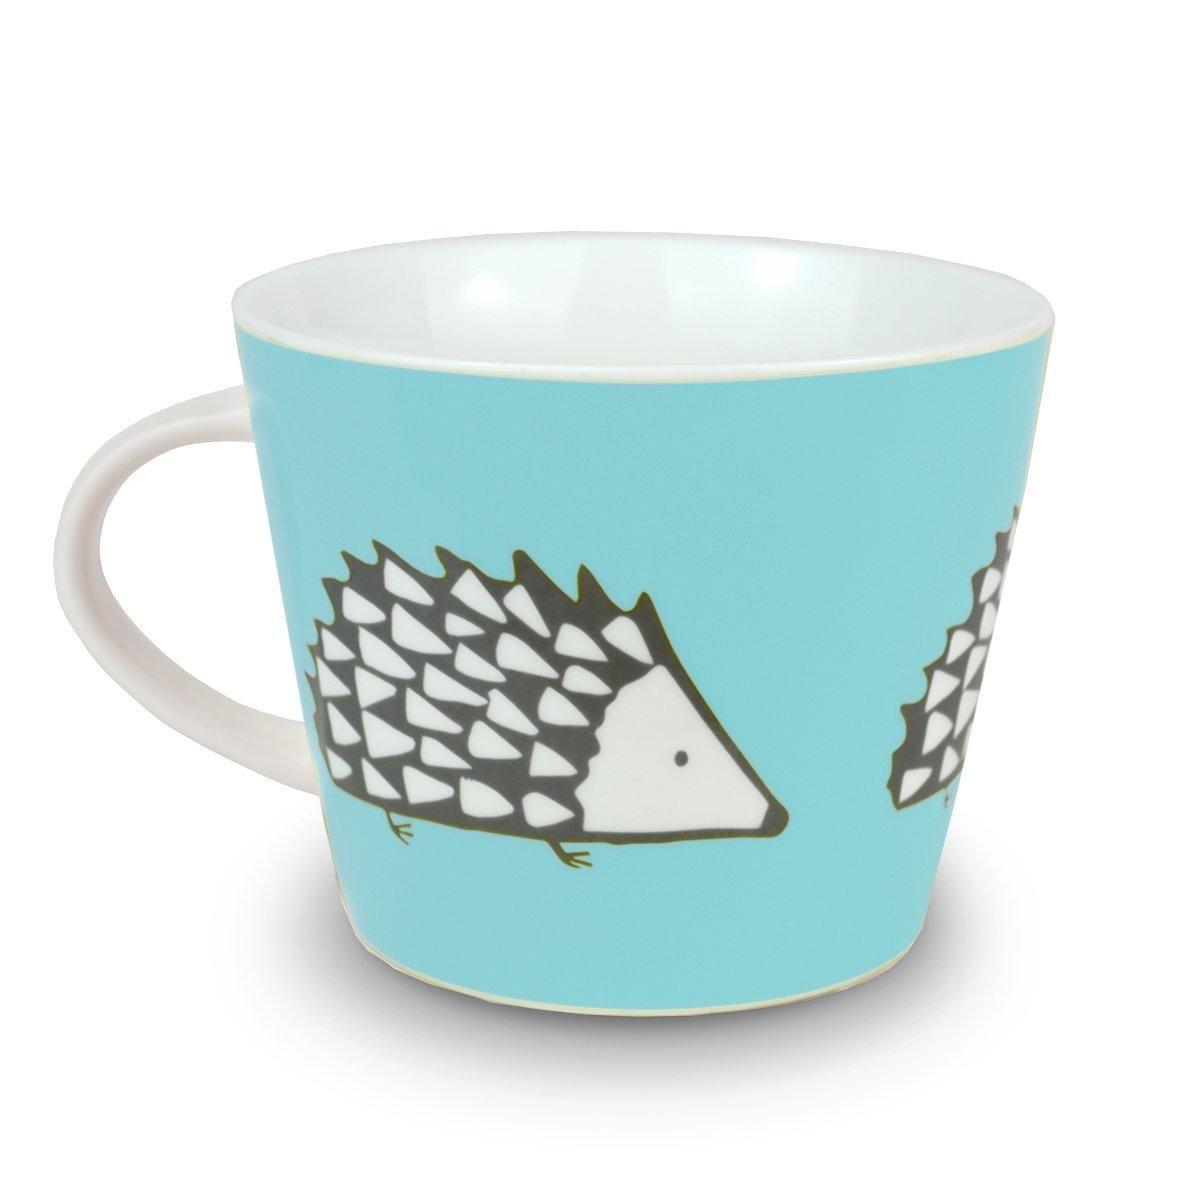  Mugs And Cups SC-0067 